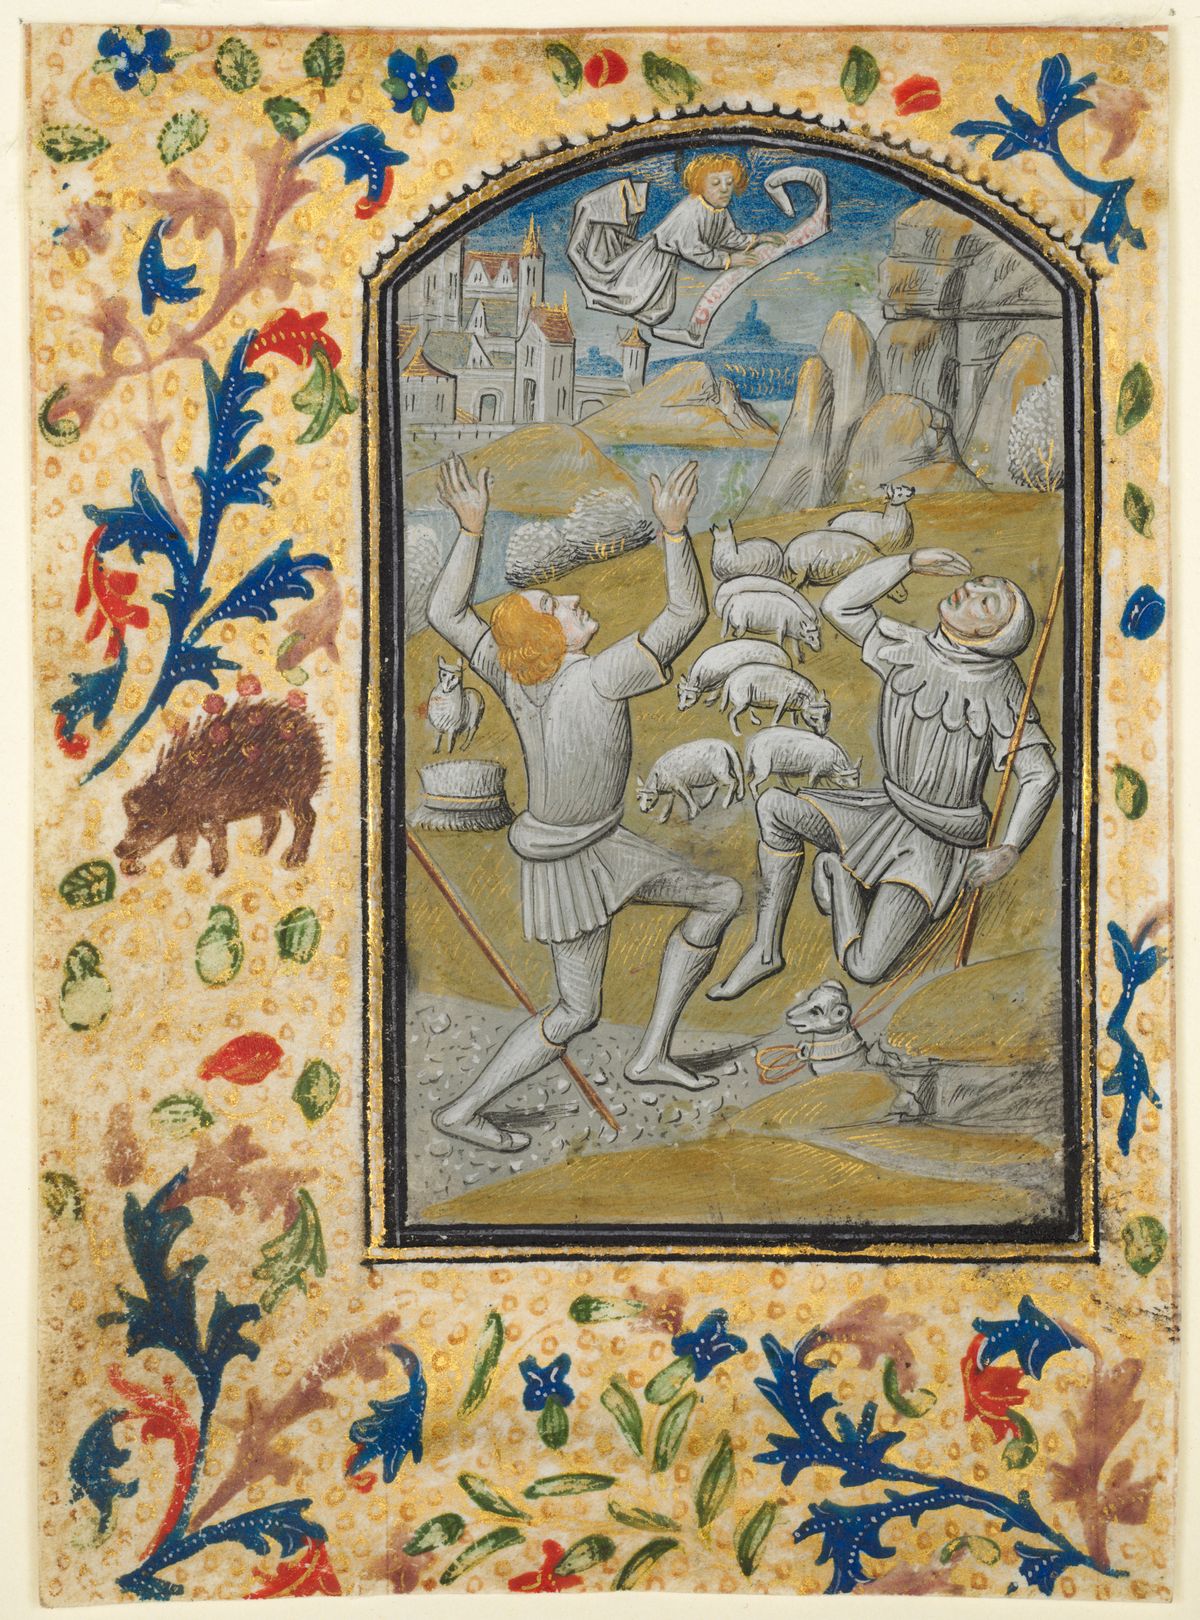 Leaf from a Book of Hours: Annunciation to the Shepherds (1470-1480) by Guillaume Vrelant - Public Domain Bible Painting